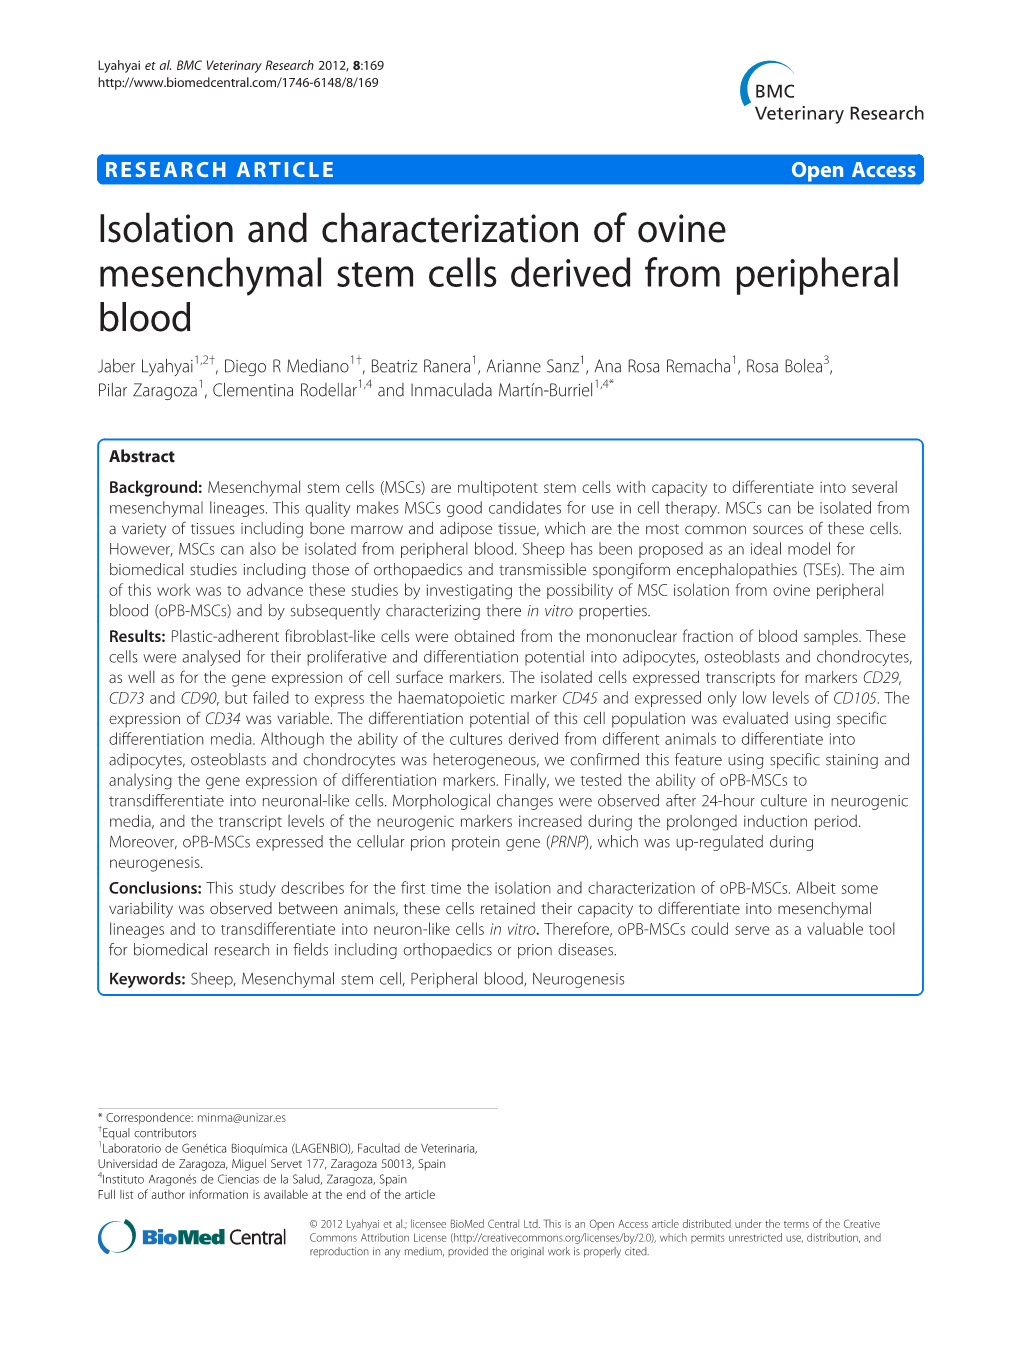 Isolation and Characterization of Ovine Mesenchymal Stem Cells Derived